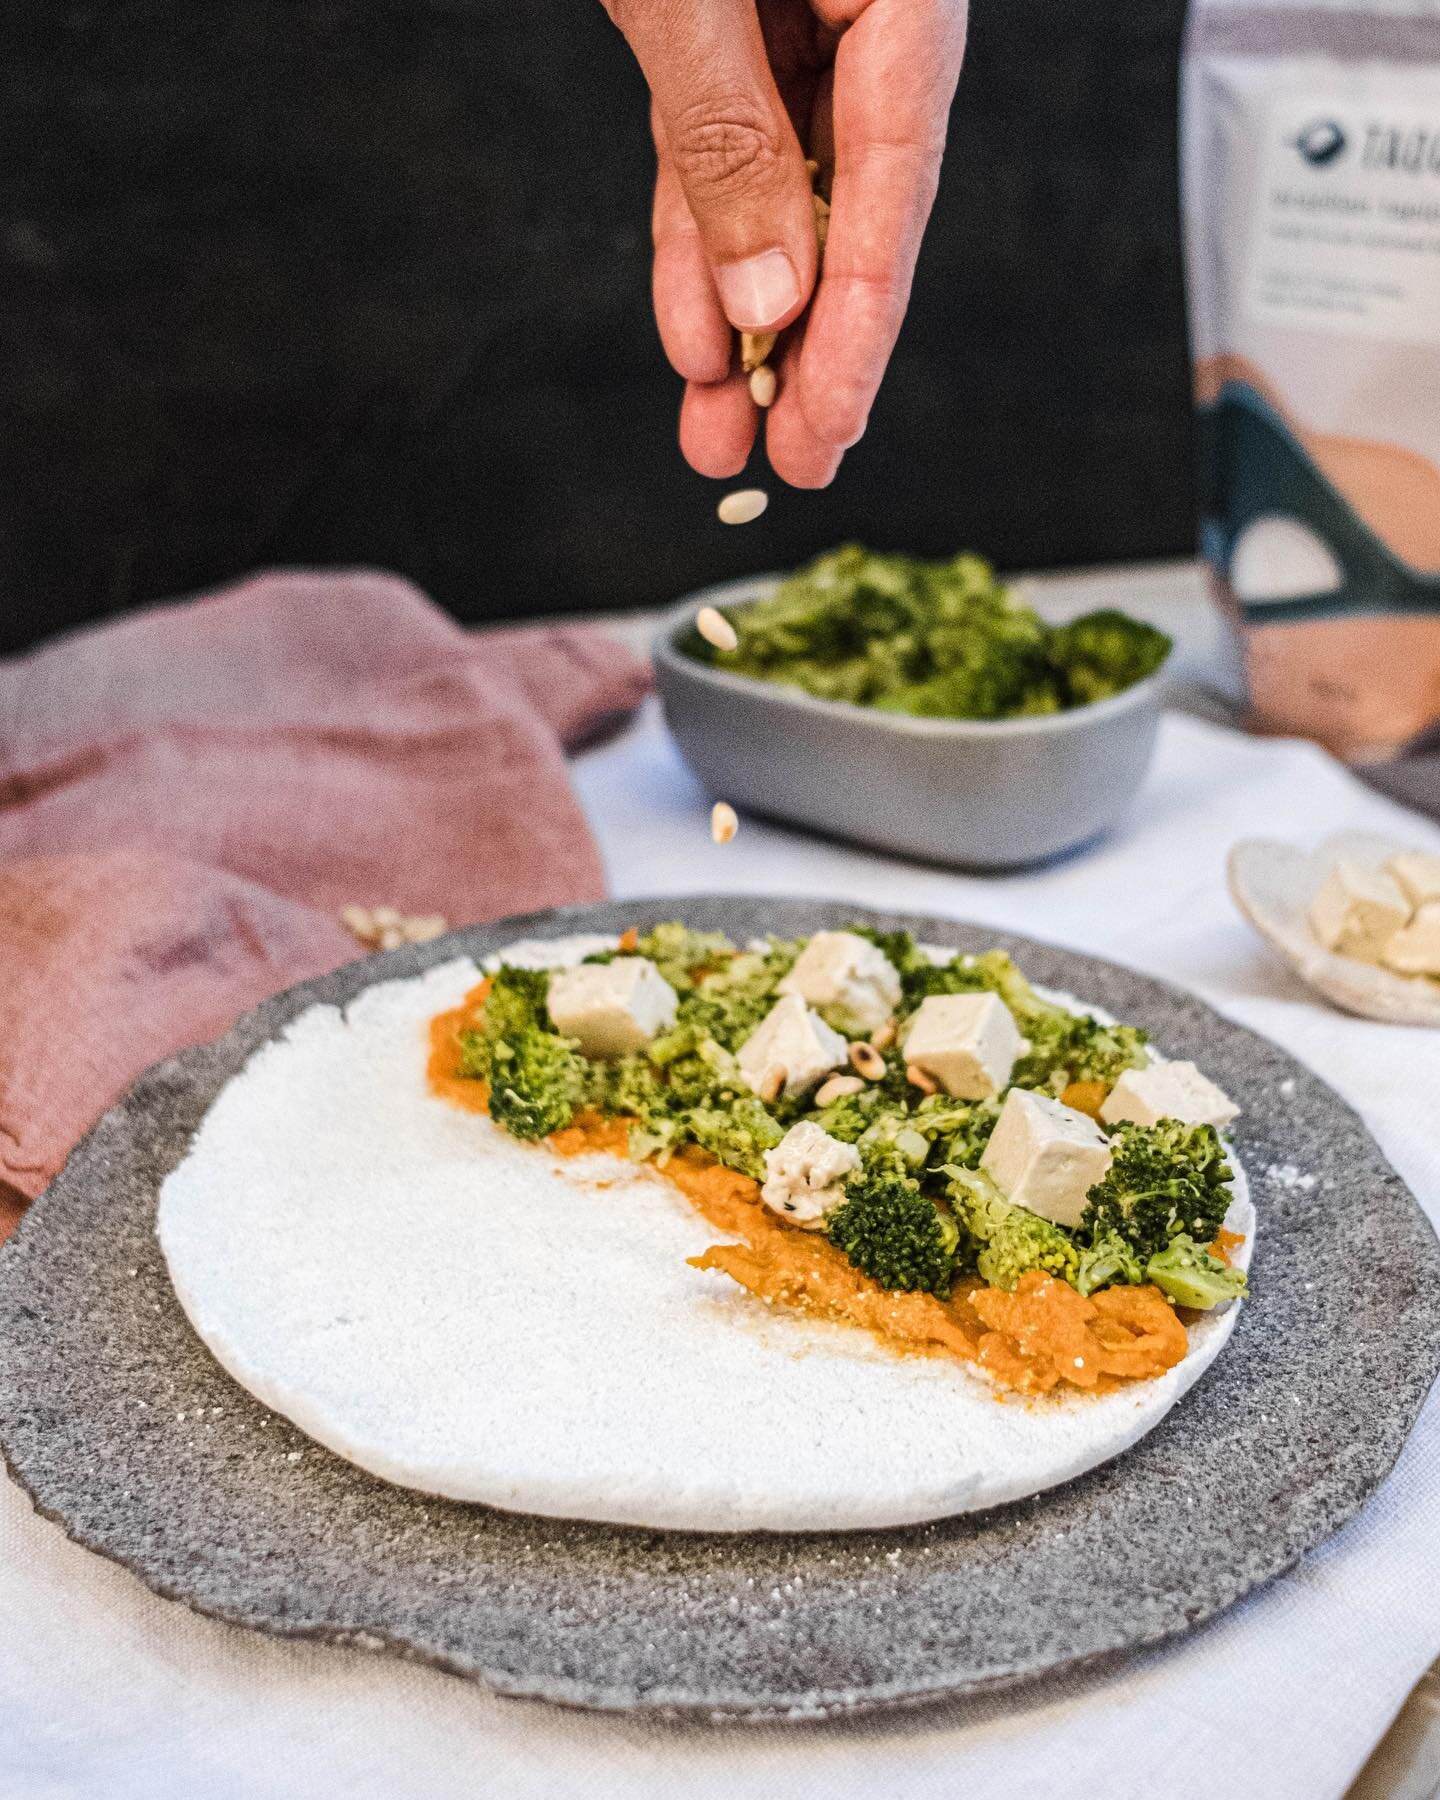 We don&rsquo;t know about you guys, but after a busy week all we want is a quick, easy and nourishing meal 🙂

This is still one of our favourite fillings: pumpkin cream, pesto broccoli and feta 🤤